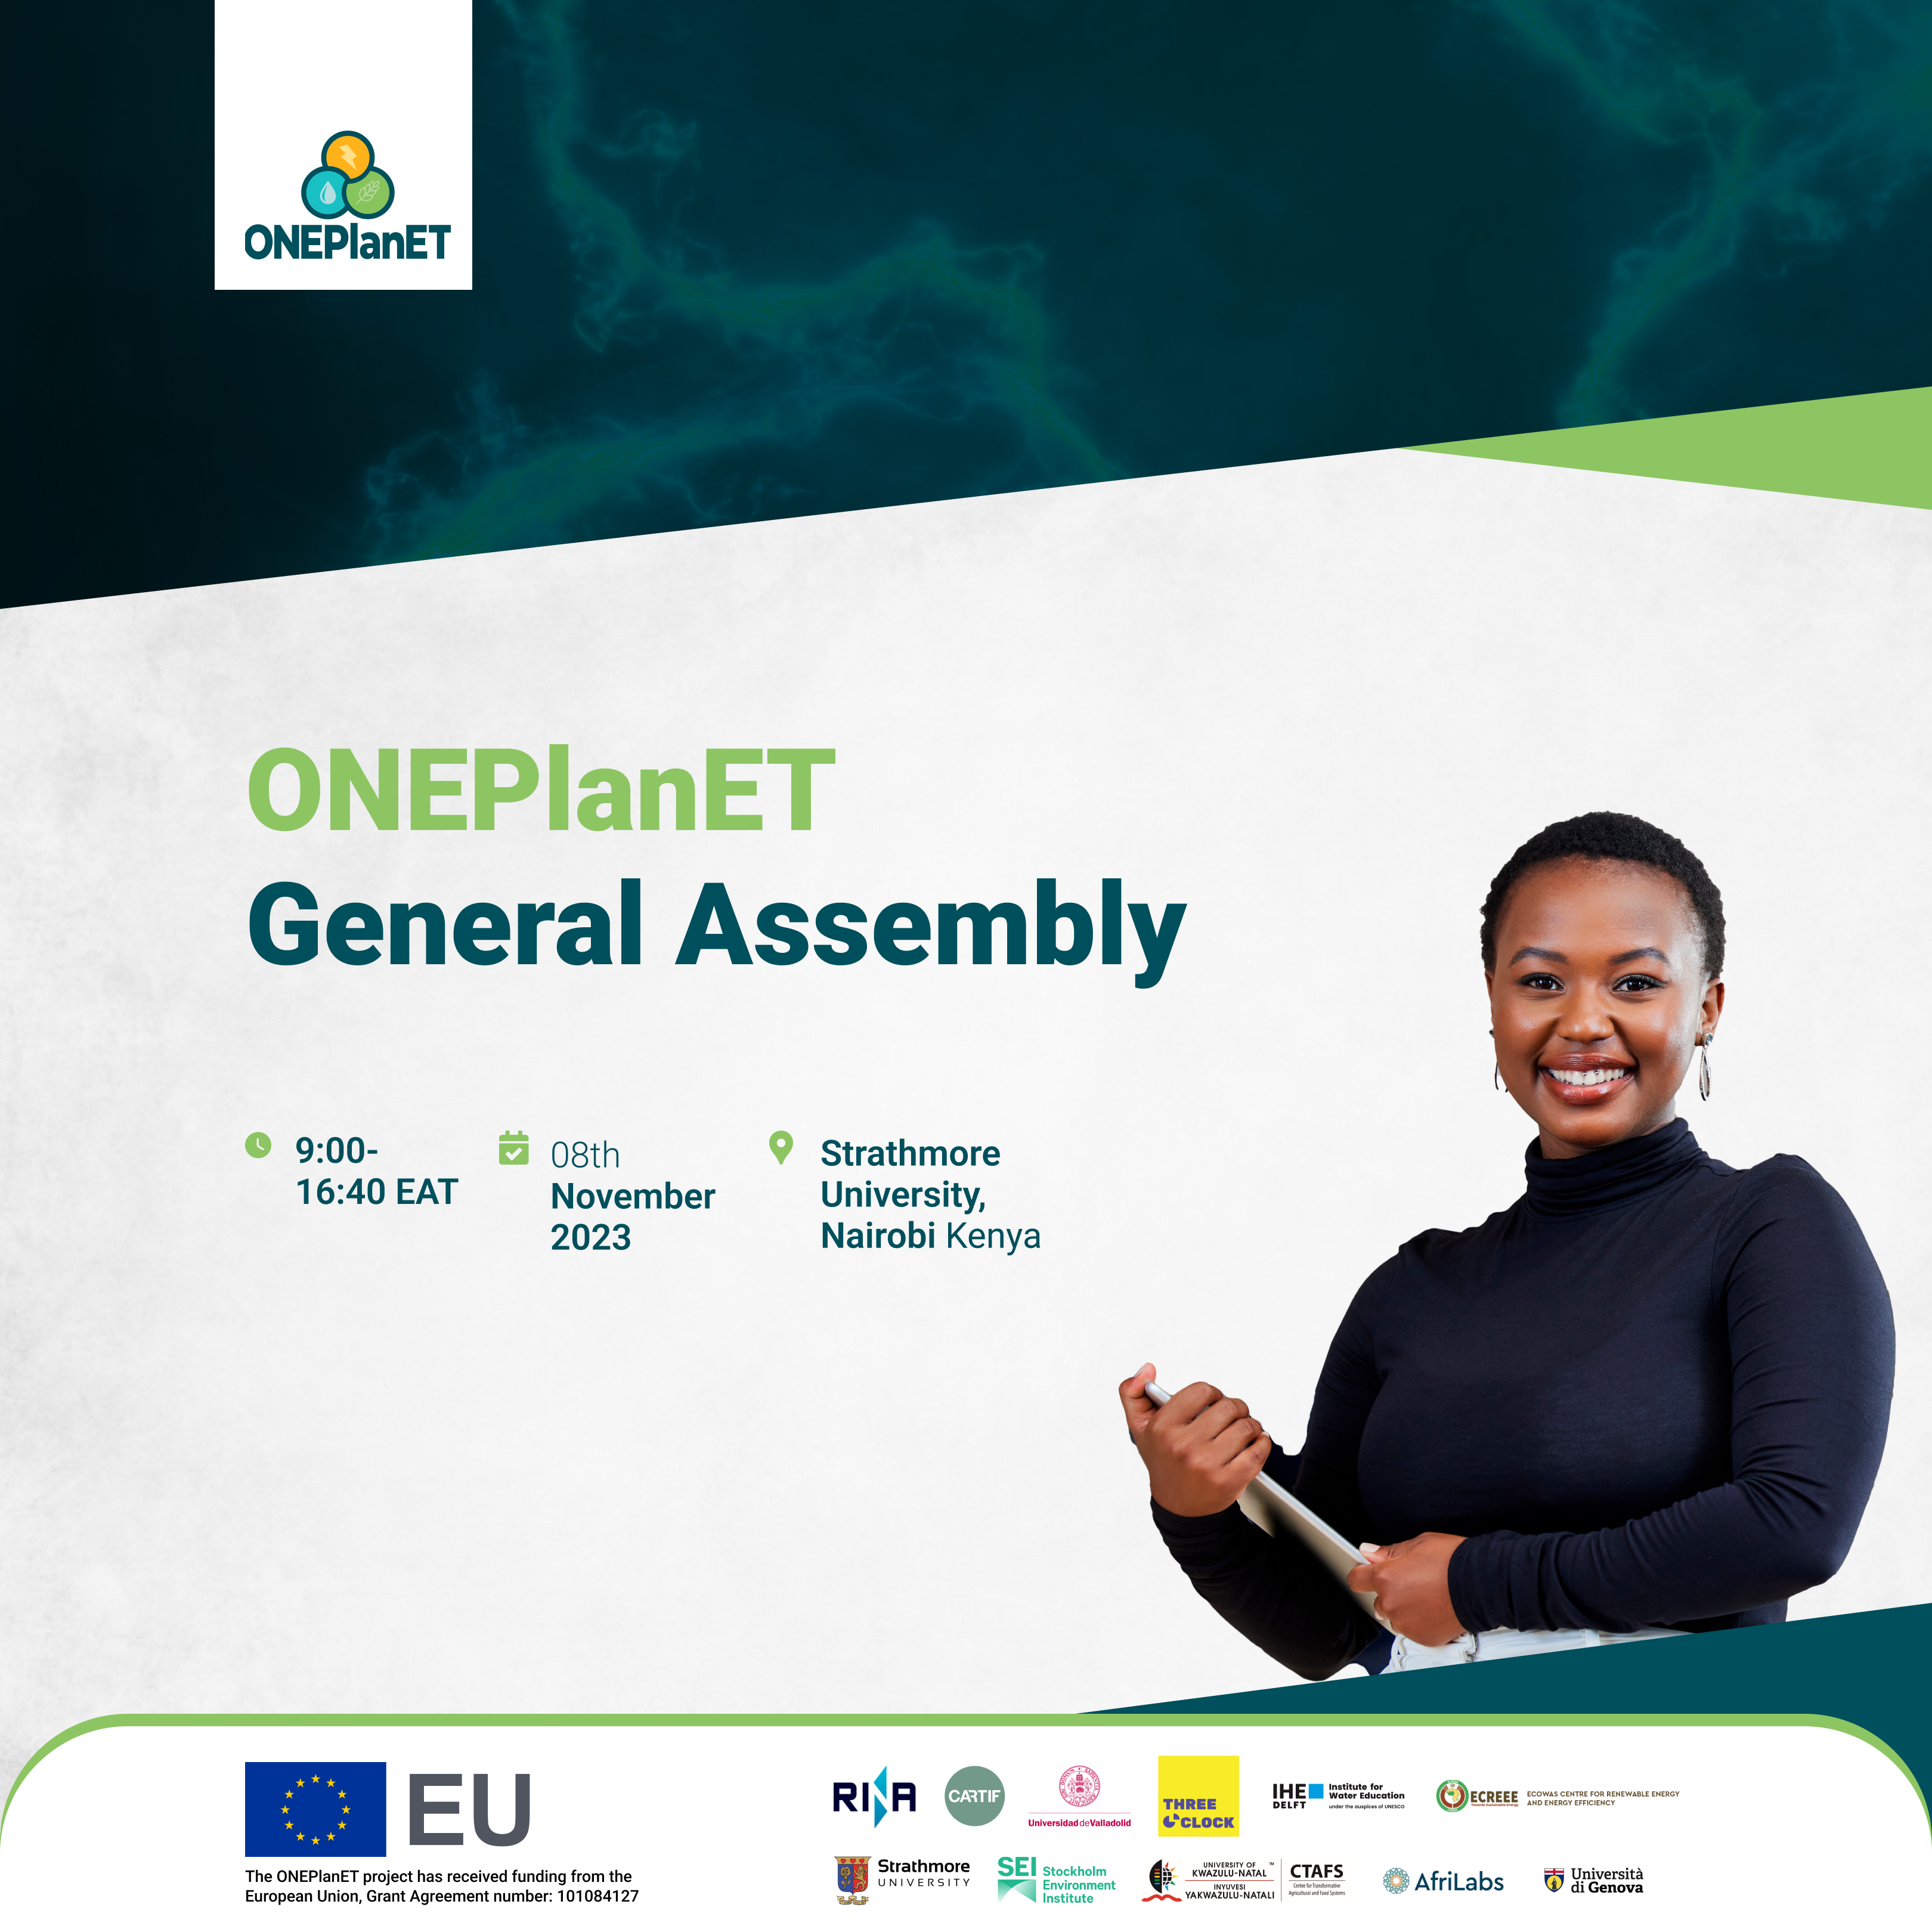 The General Assembly of ONEPLANET